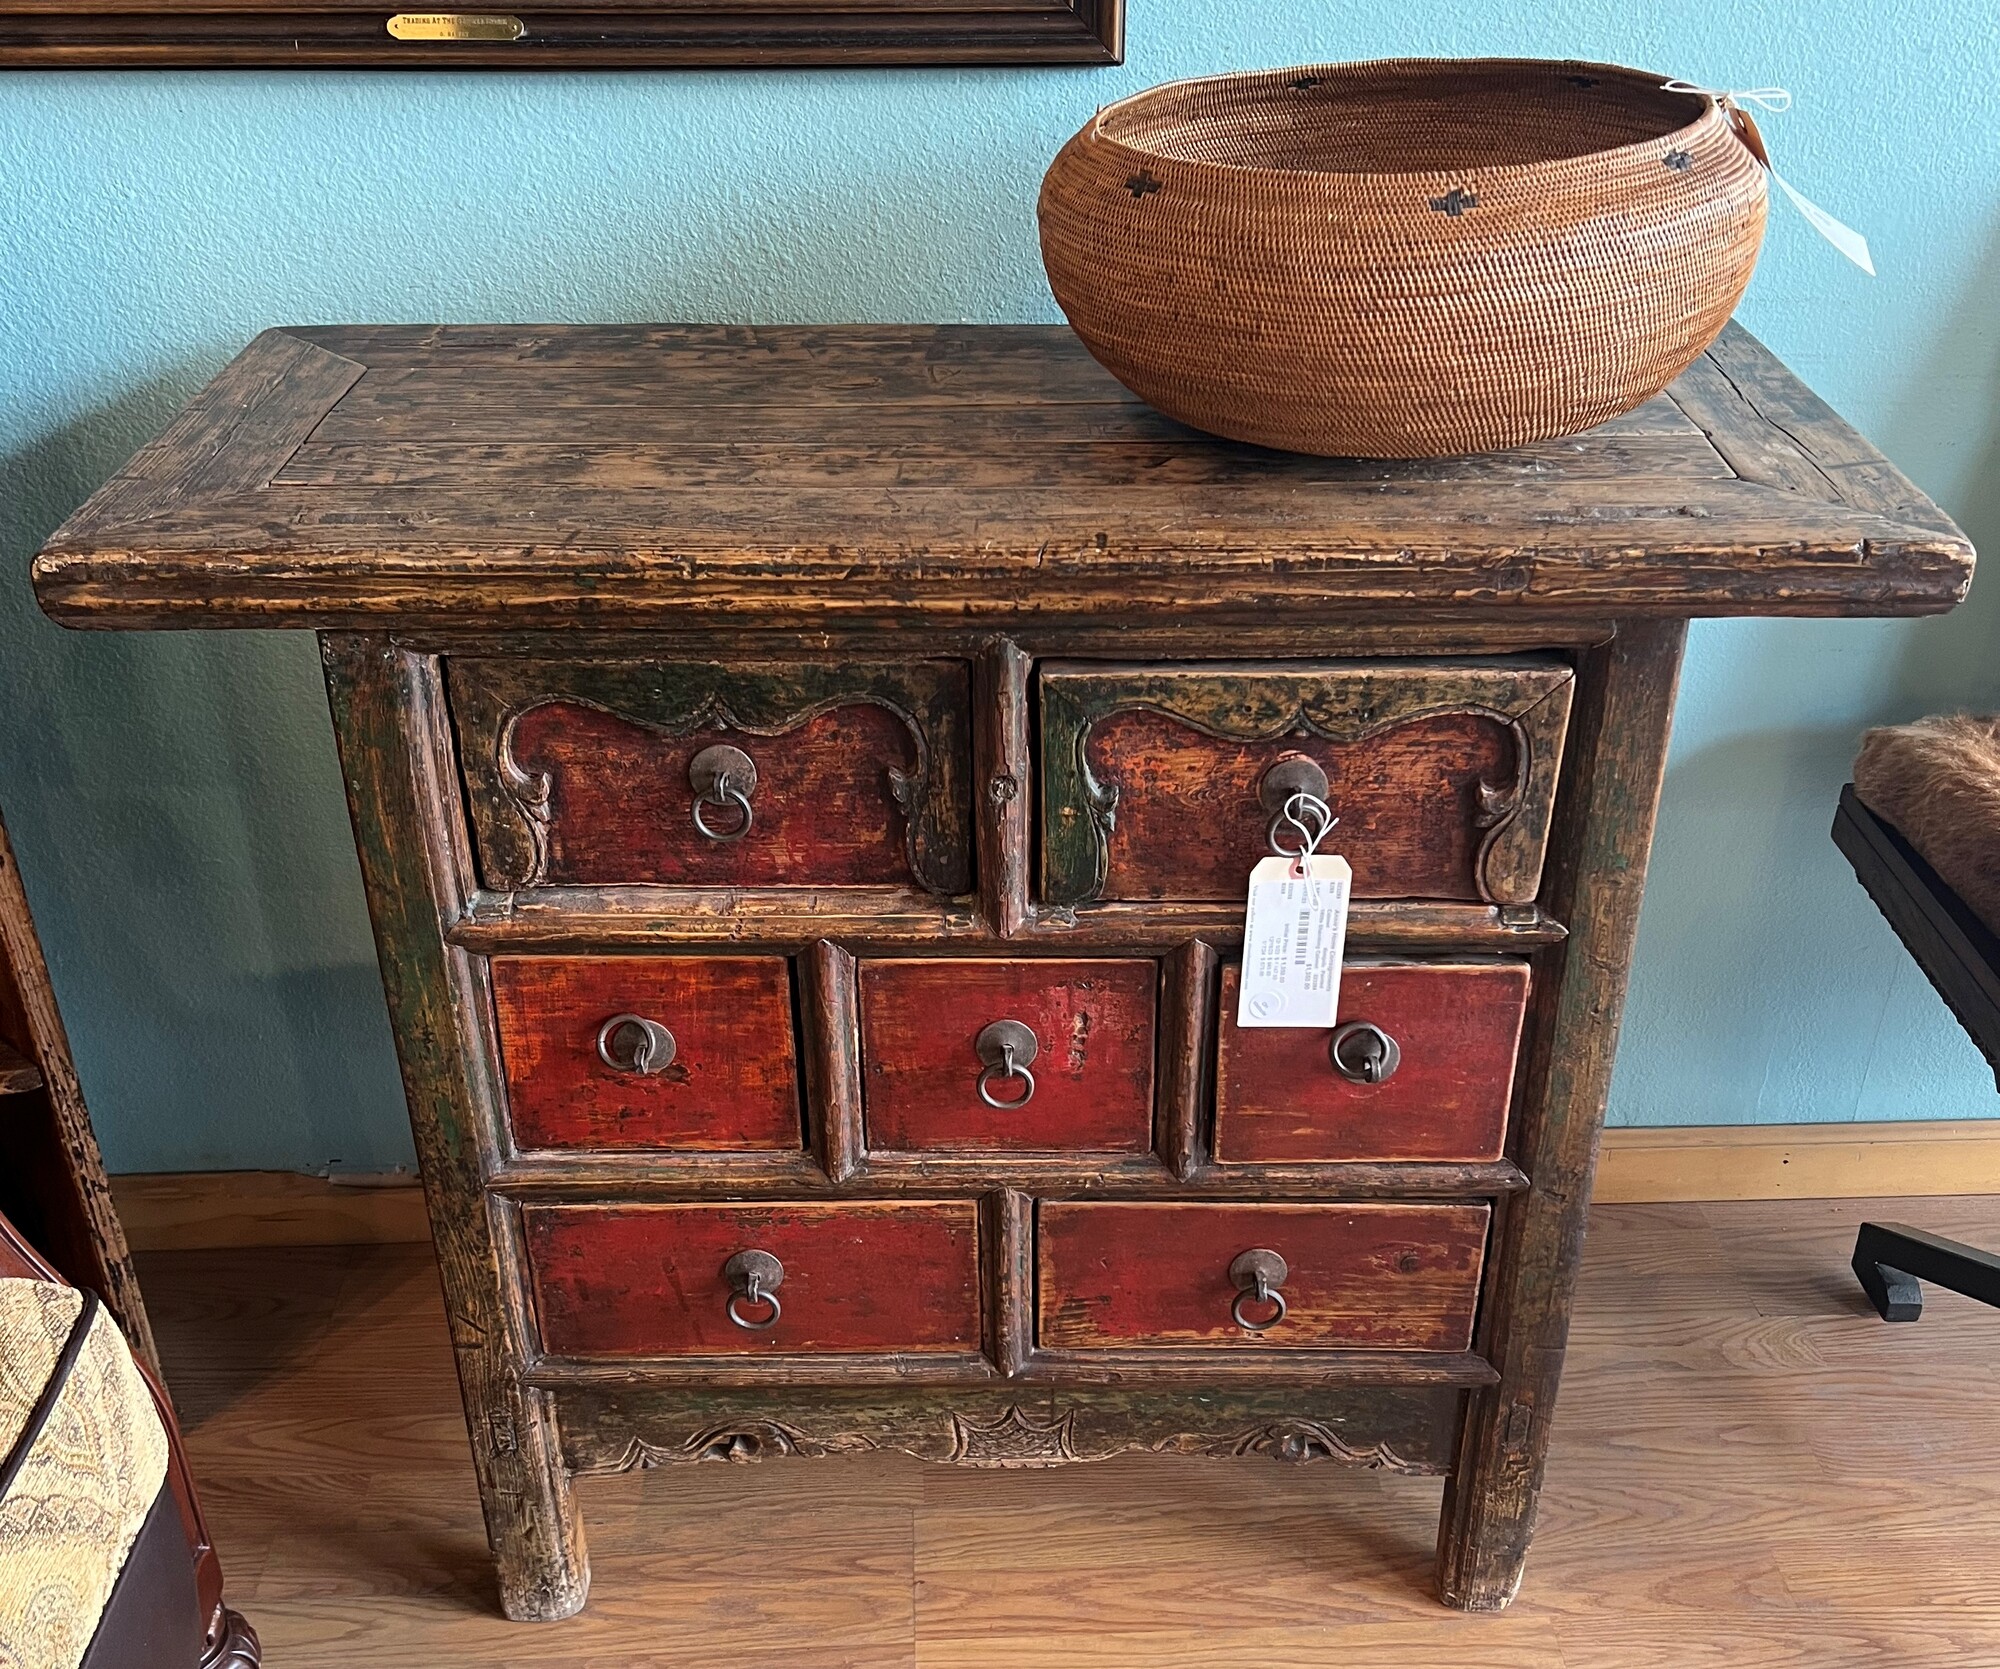 1800s Shandong Cabinet, Mongolia, Painted
41in x 17in x 34in